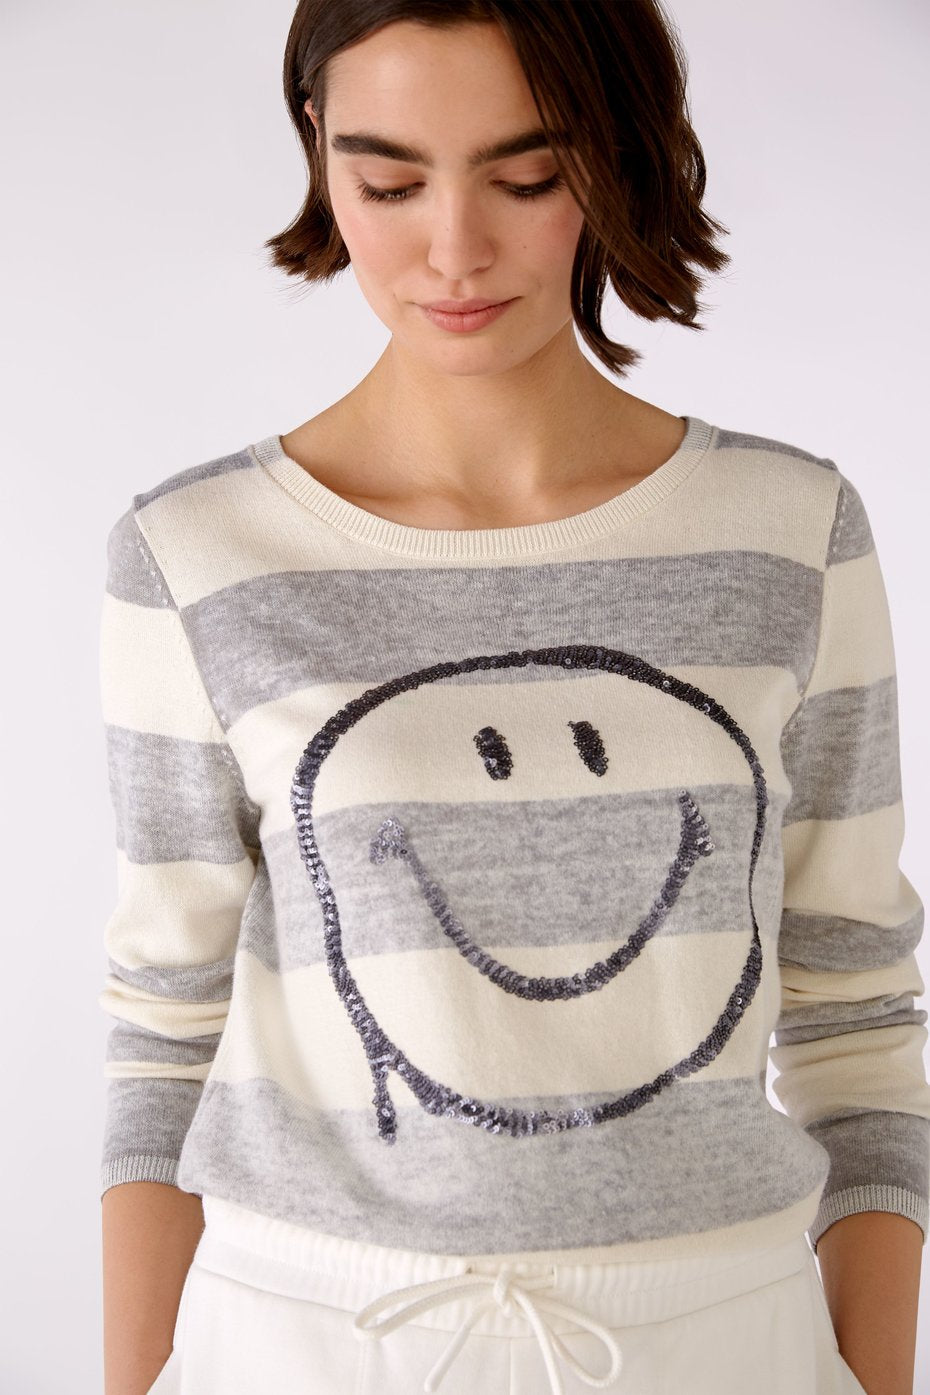 OUI CLOTHING SMILEY FACE SWEATER WITH SEQUINS